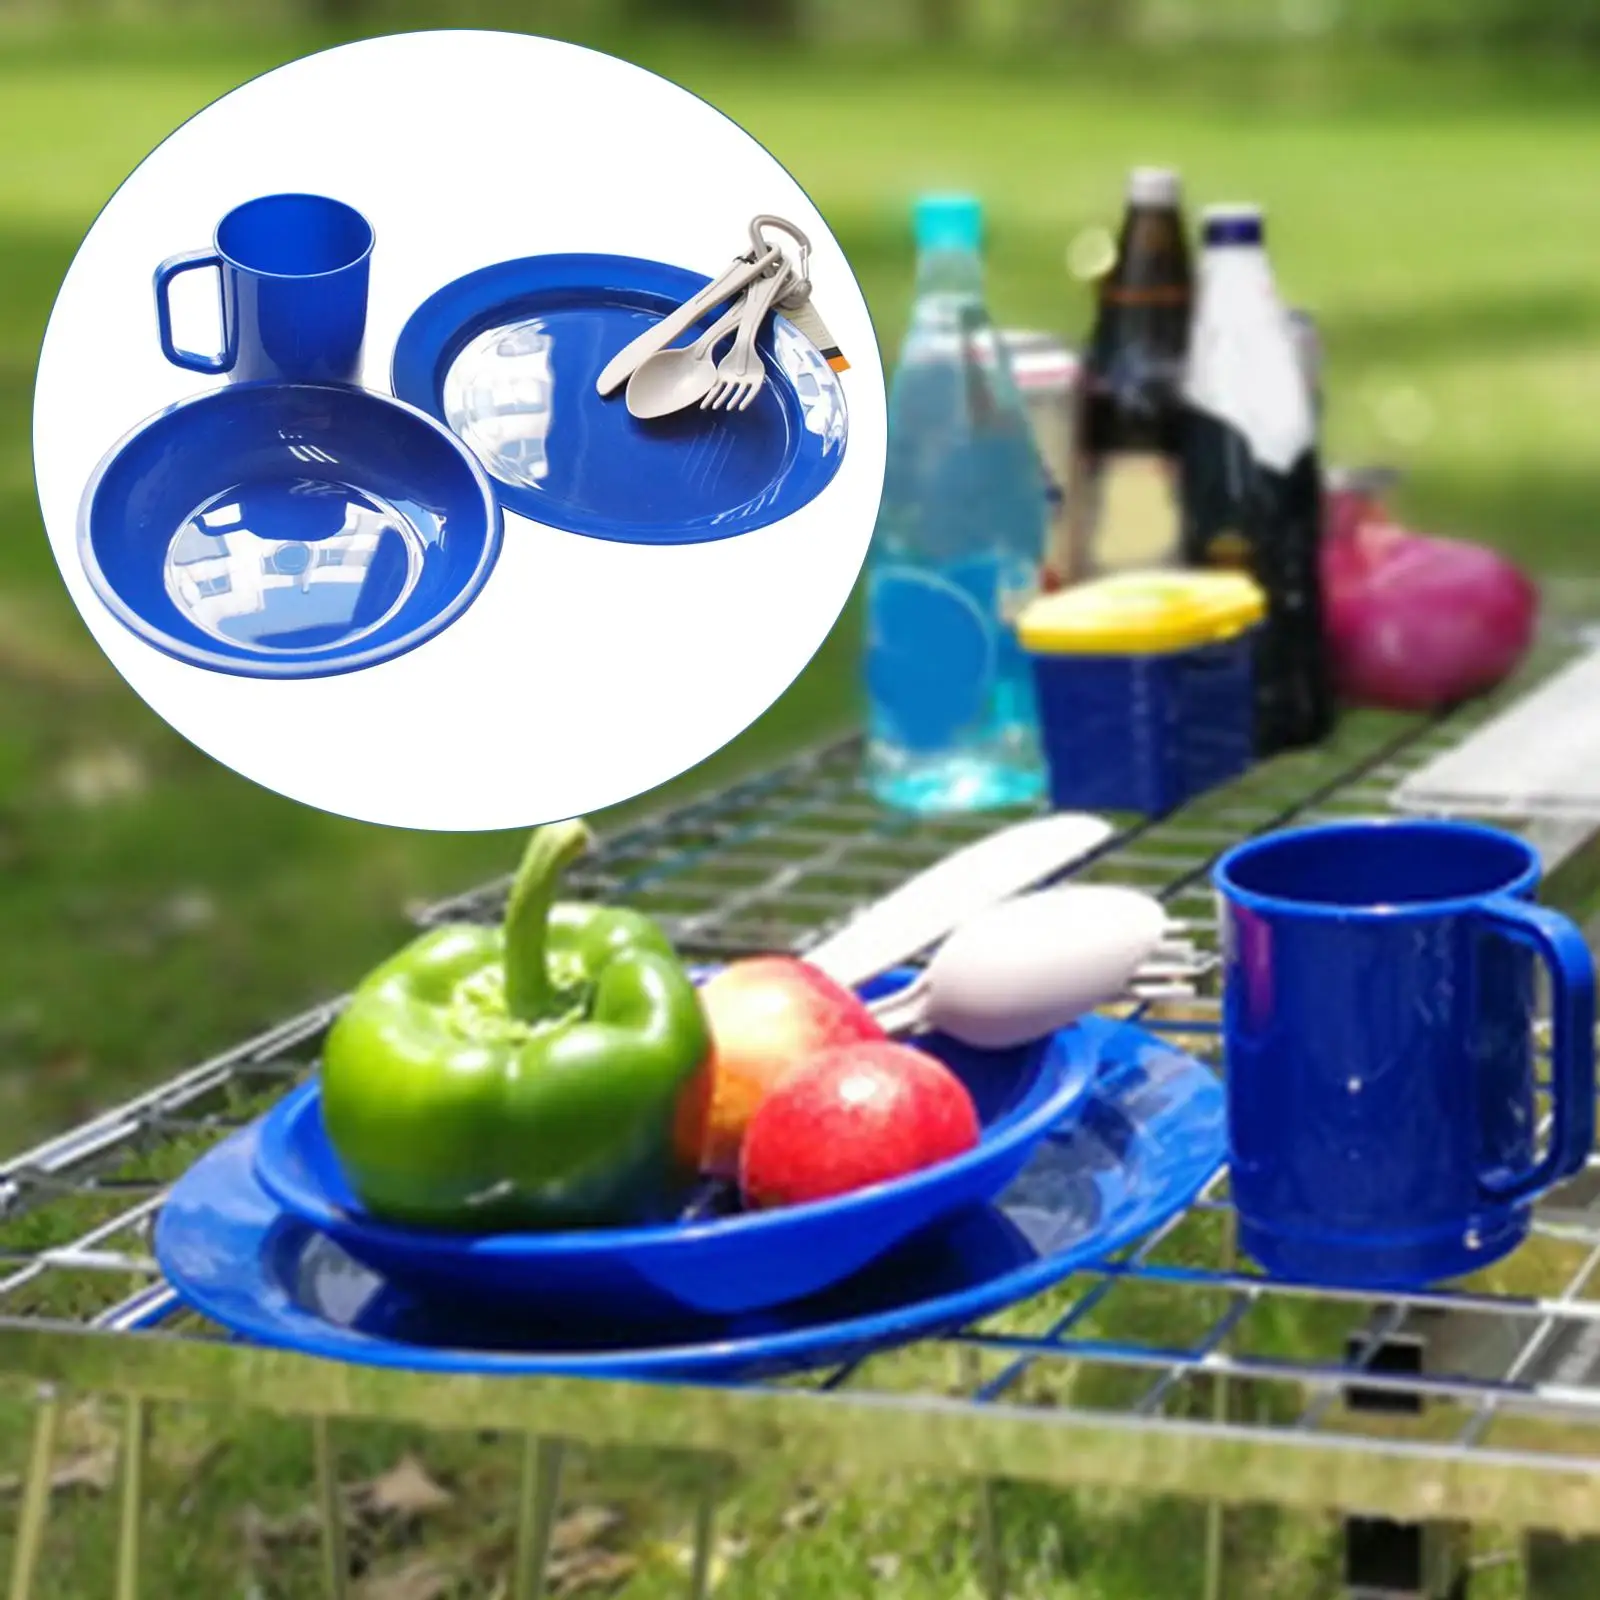 6x Outdoor Camping Tableware Set W/ Carry Bag for Picnic Backpacking Hiking